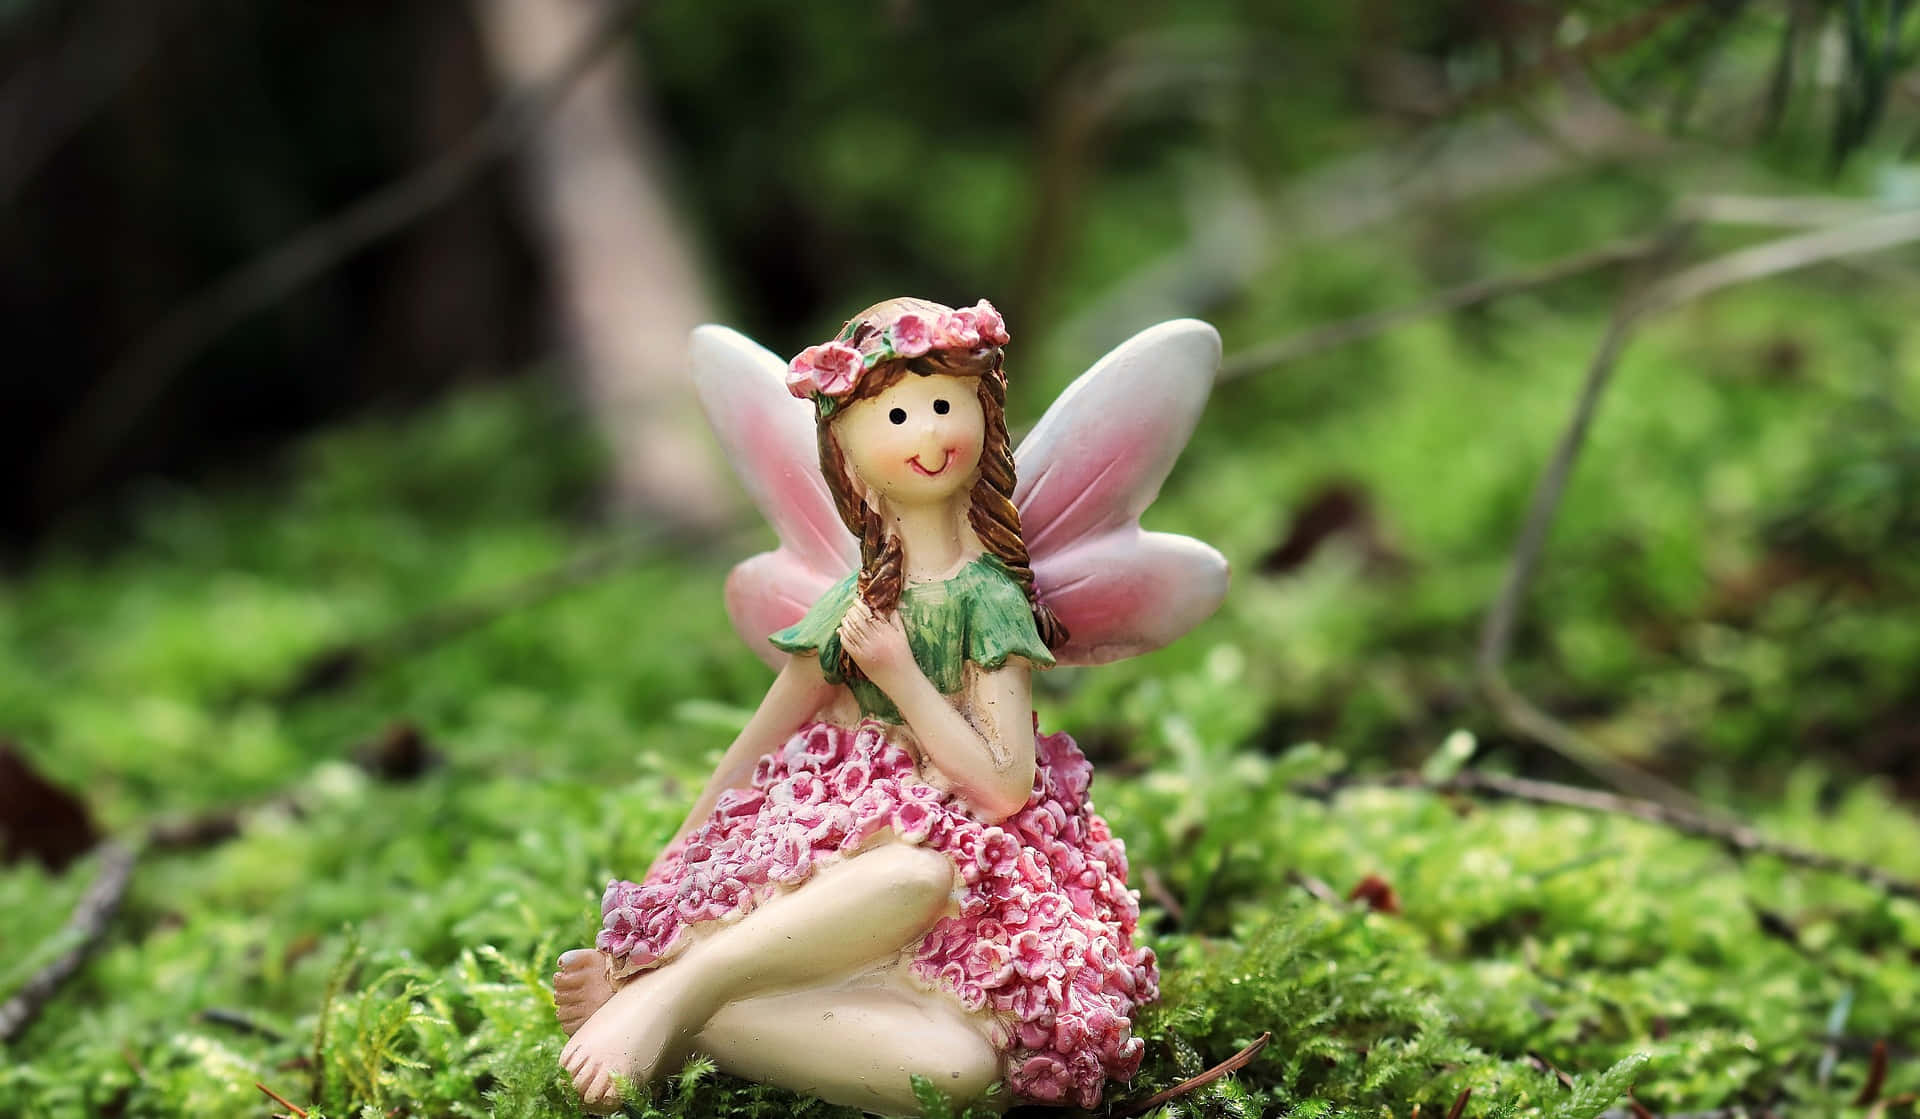 Cute Real Fairy Figurine Picture